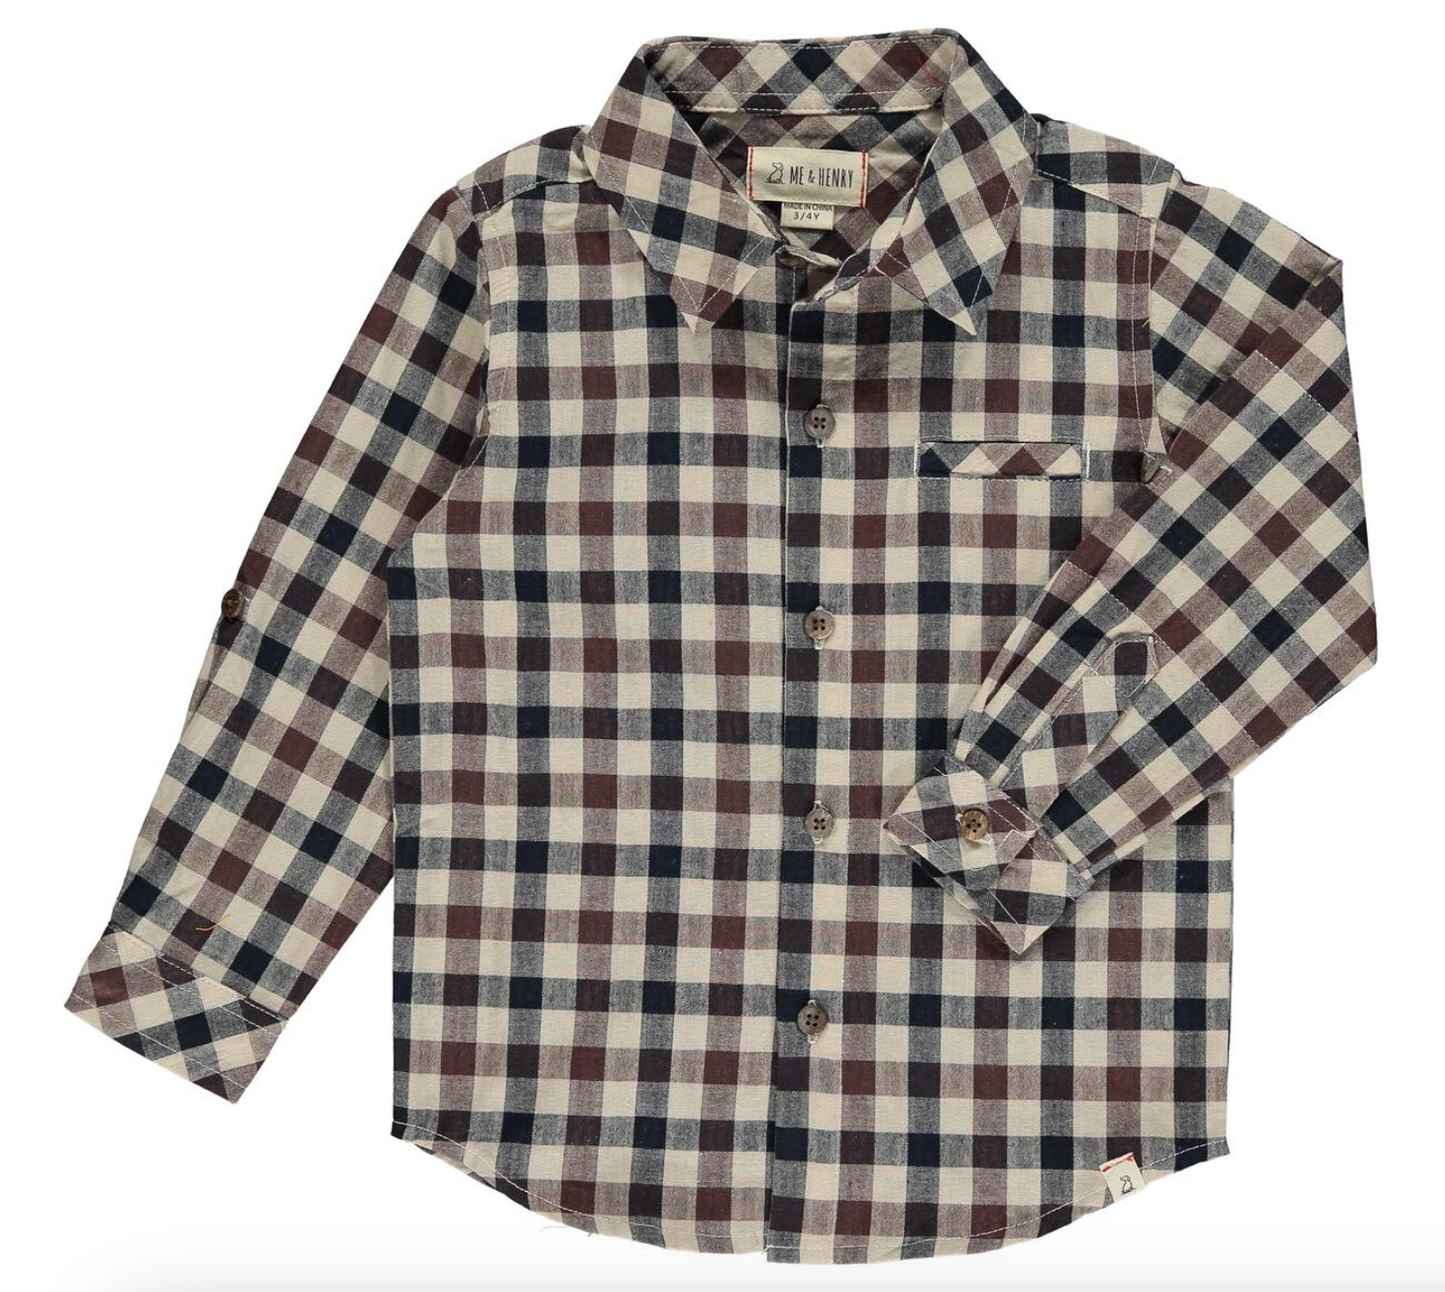 Atwood Woven shirt